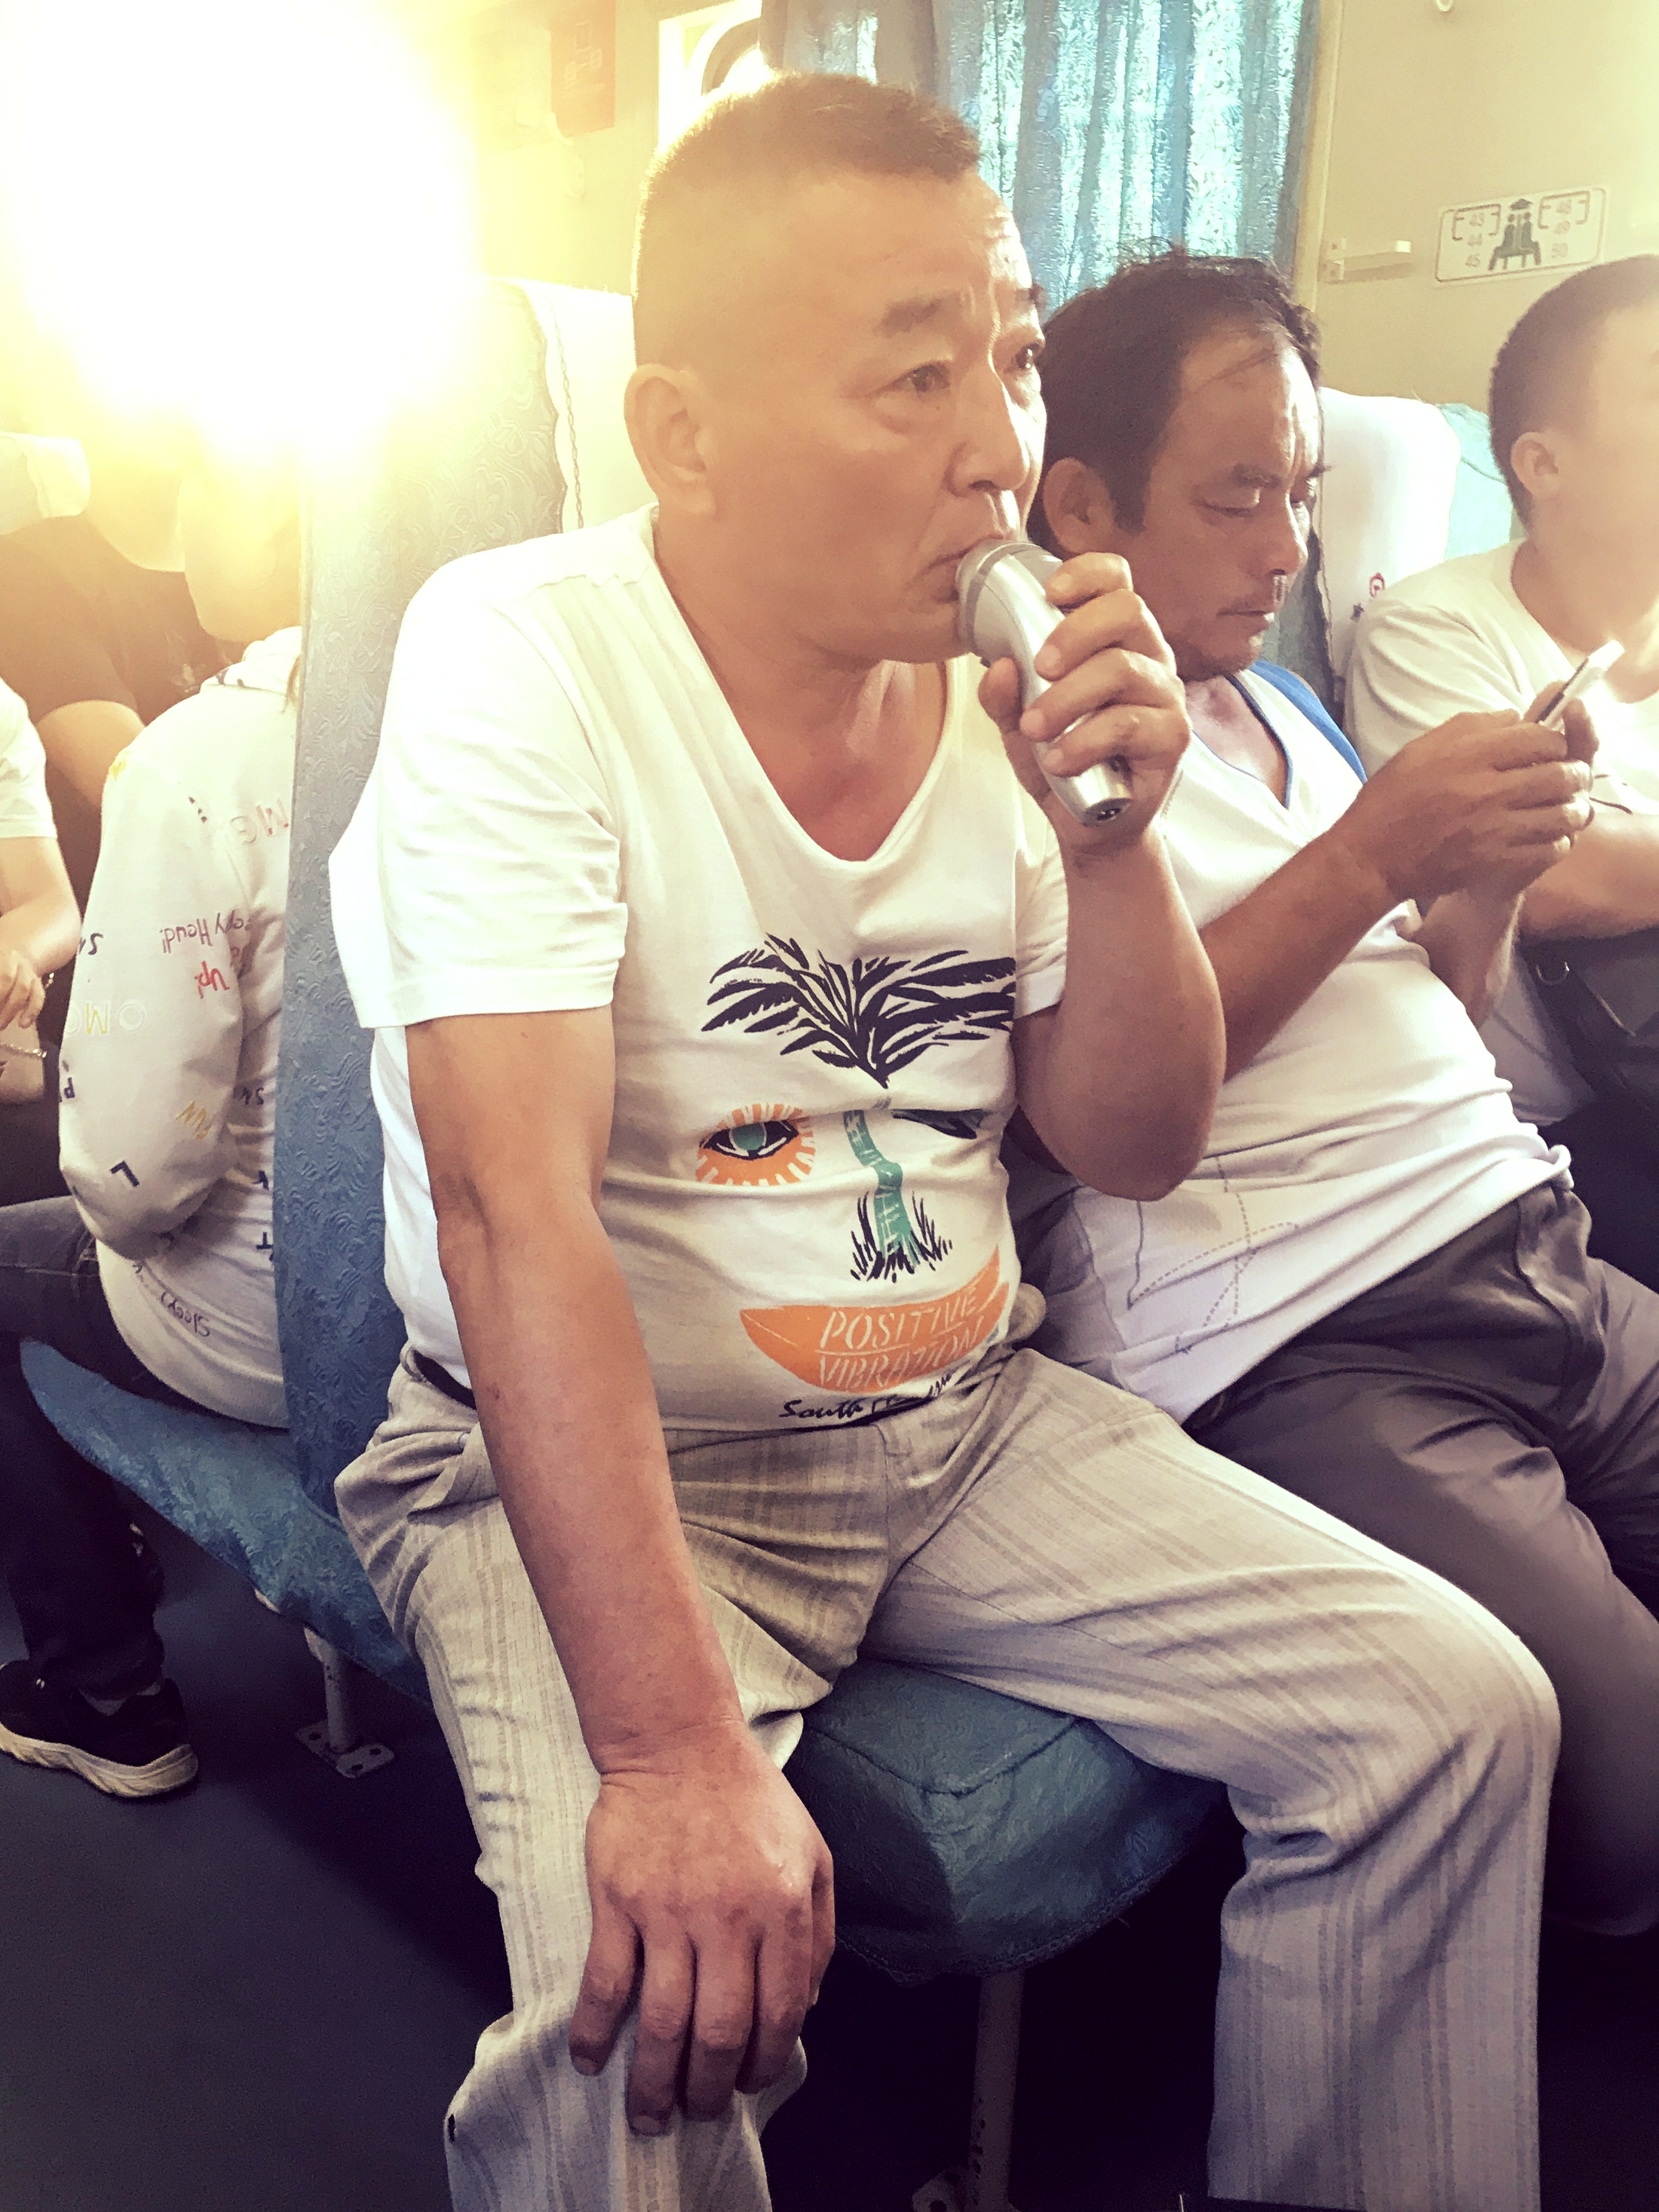 CHINESE MAN SHAVING ON THE TRAIN